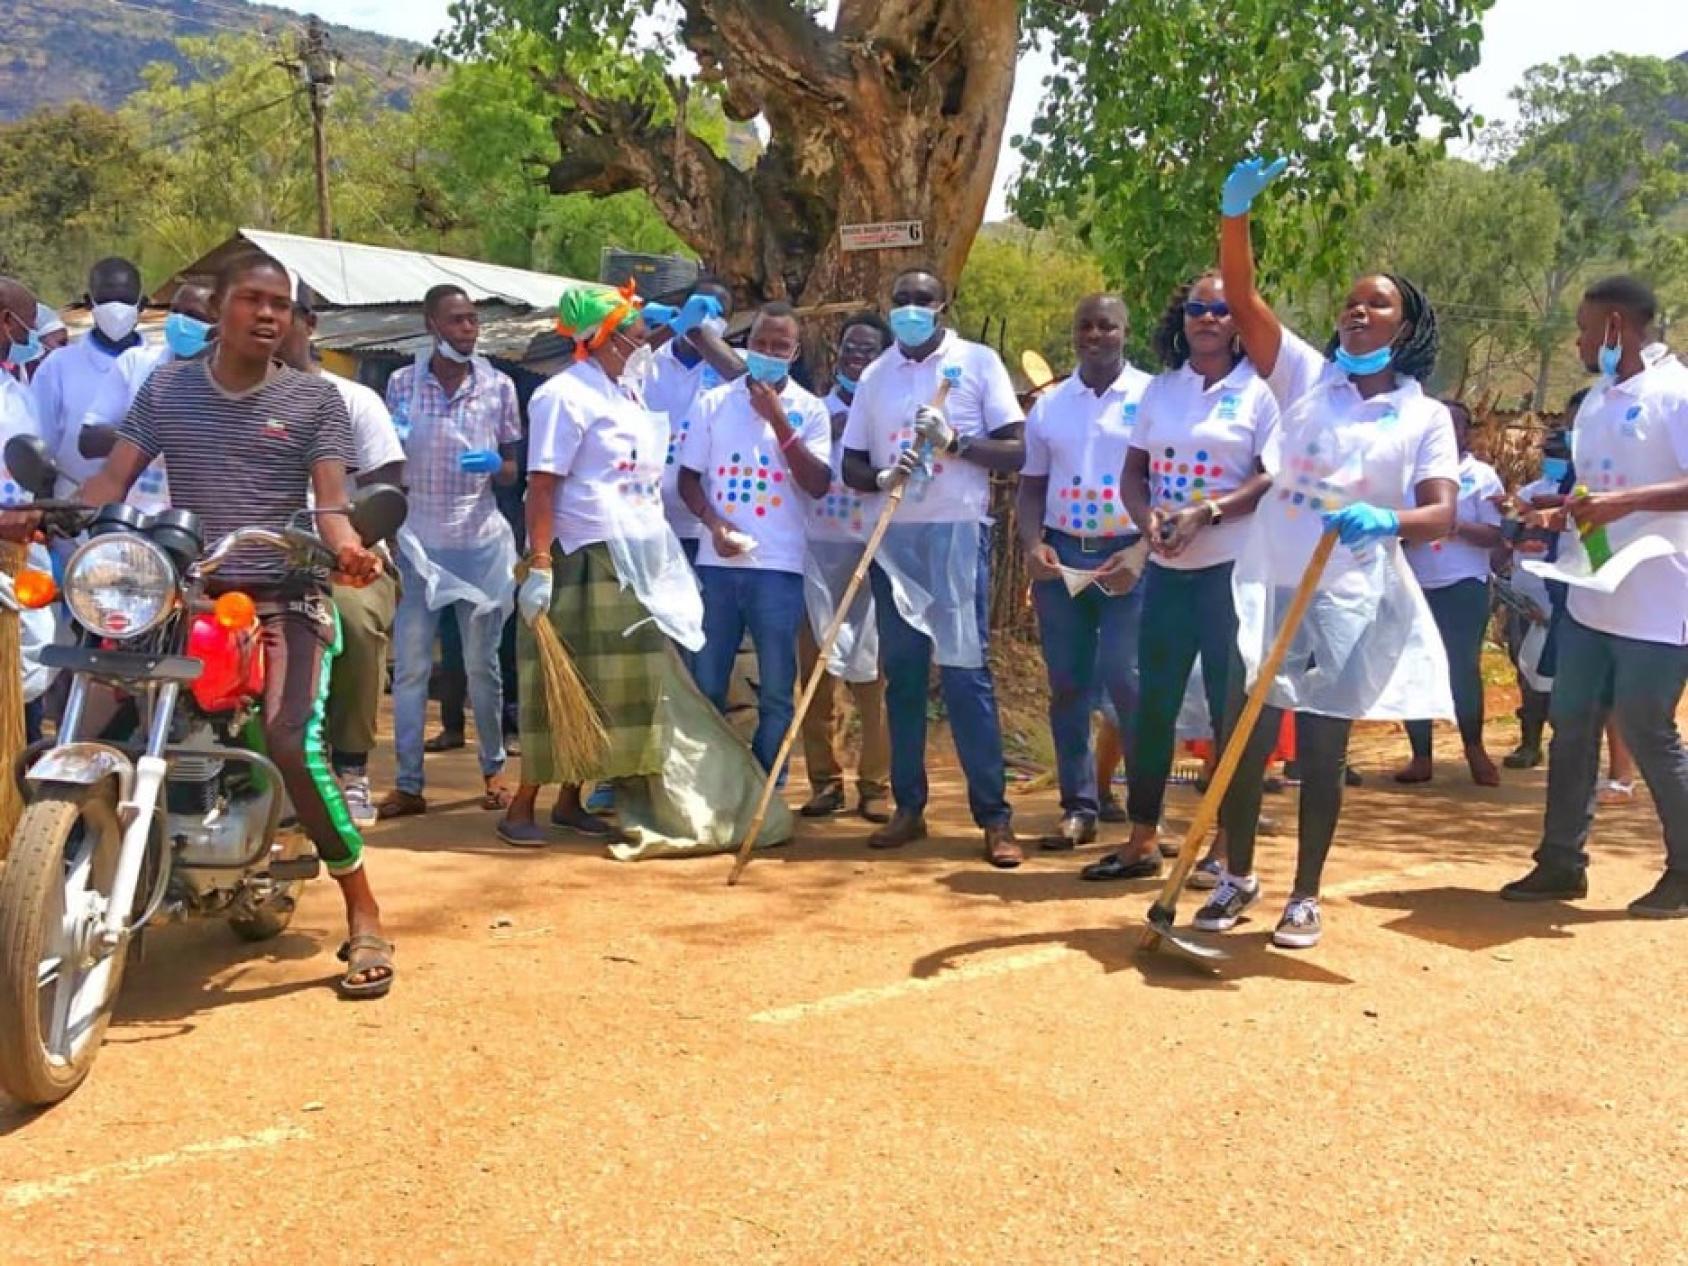 On a sunny day, a group wearing UN Uganda (SDG) t-shirts, appear to be cleaning and smiling.